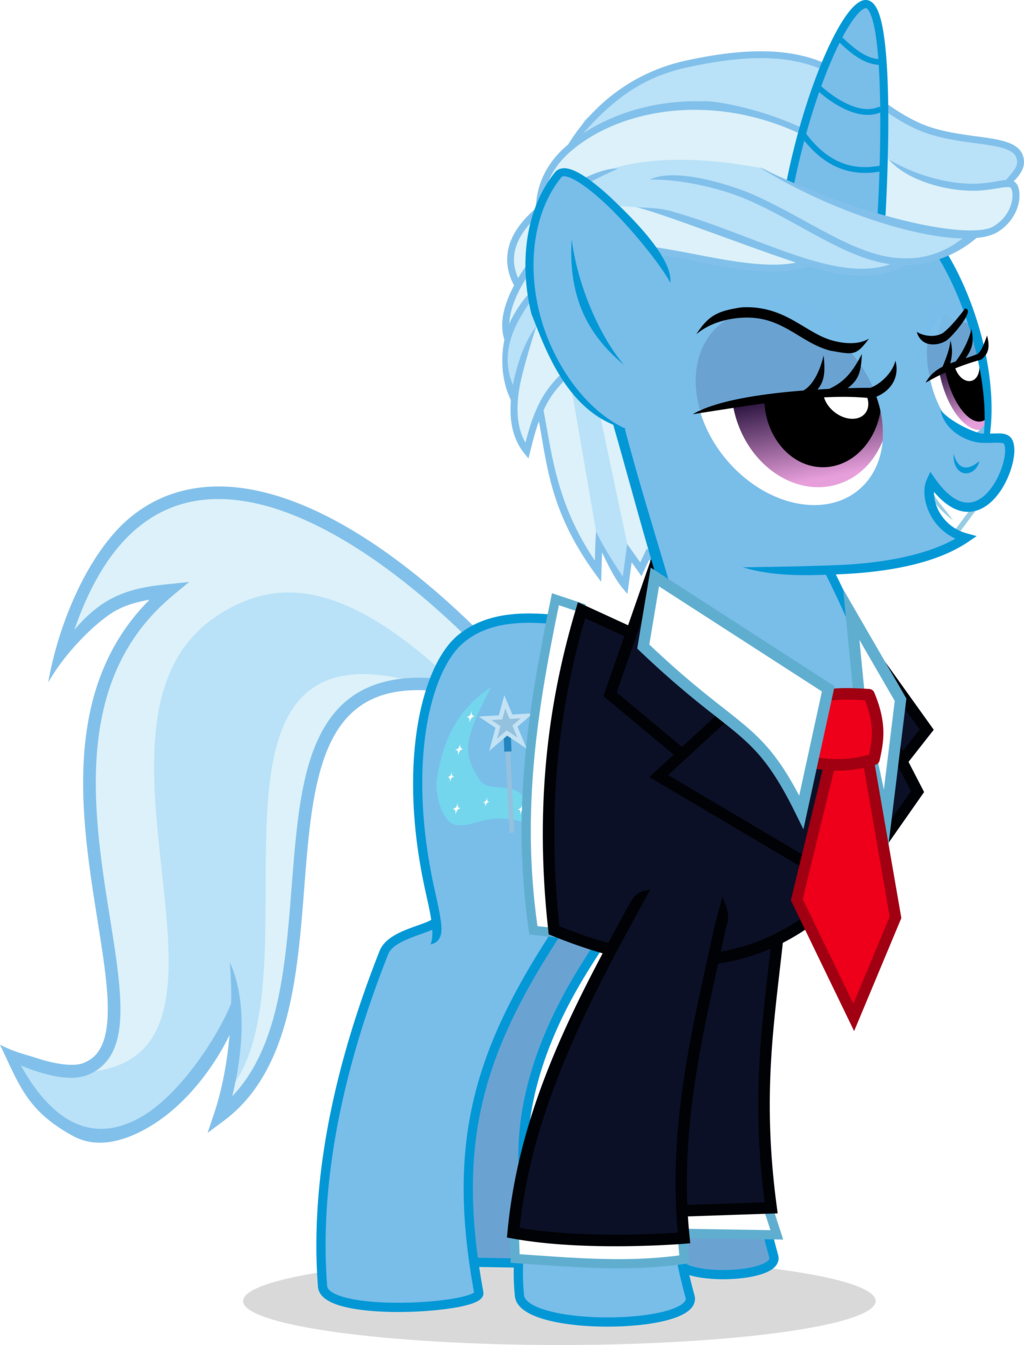 _request__trixie_trump_by_limedazzle-dao